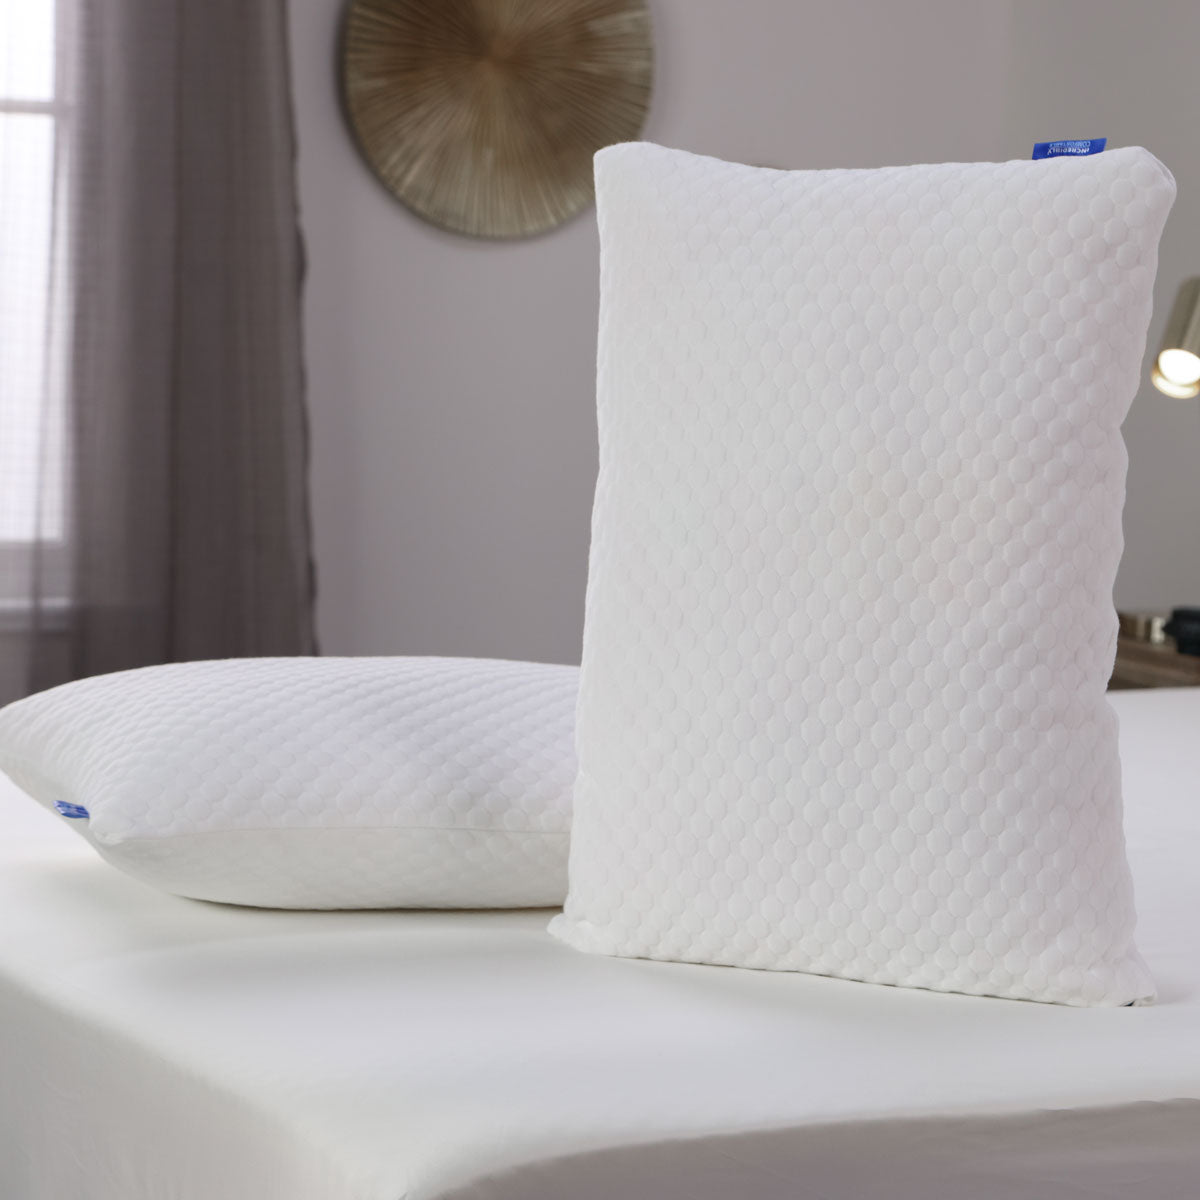 A pair of Seriously Comfortable Cool Cloud Comfort pillows 